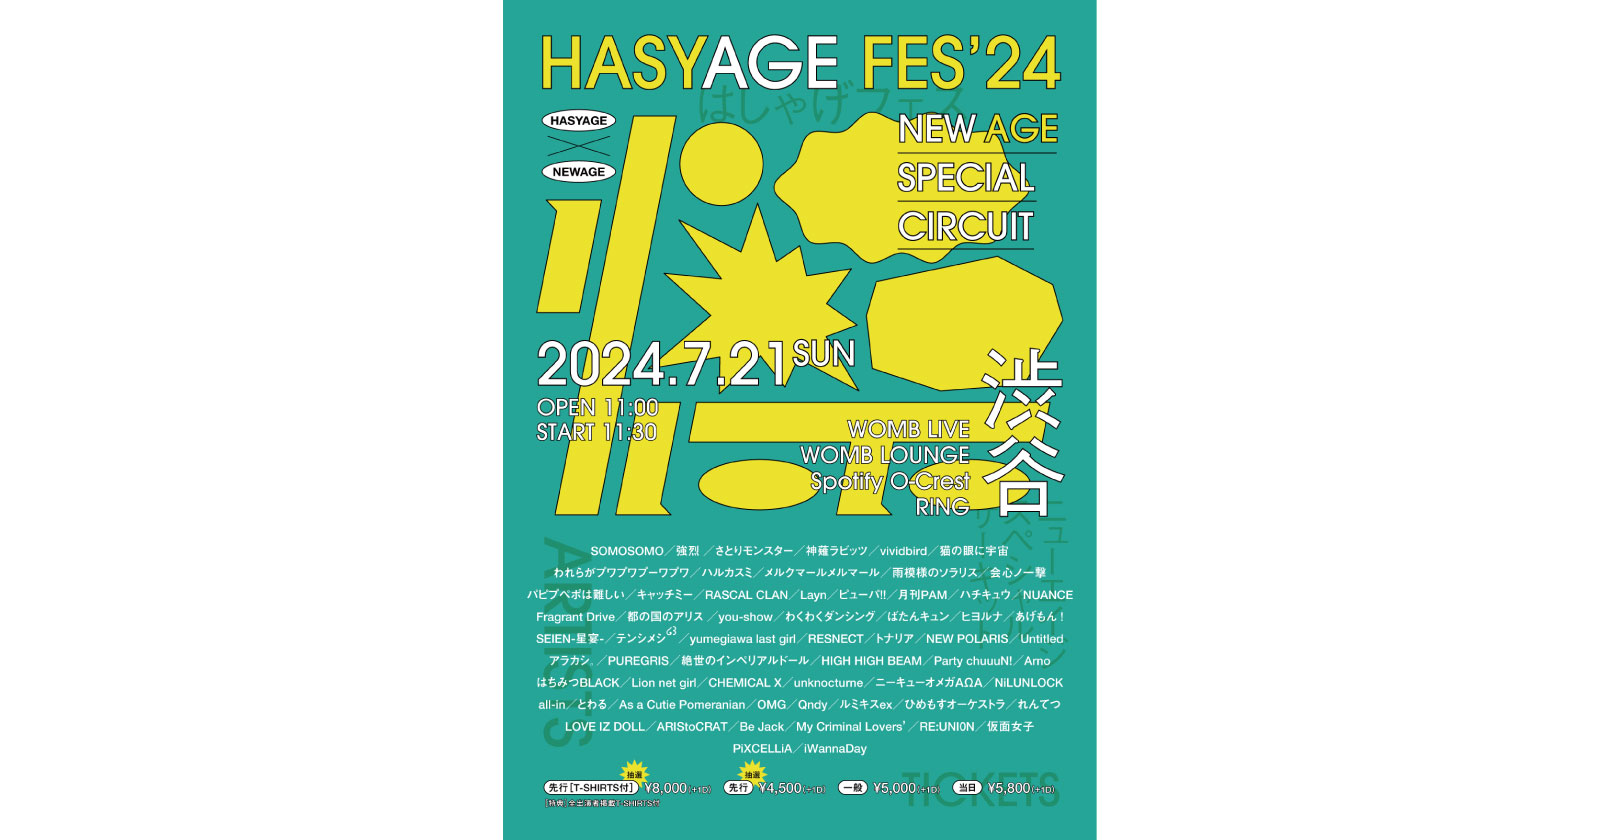 2024/7/21_『HASYAGE FES 2024』 NEW AGE SPECIAL CIRCUIT